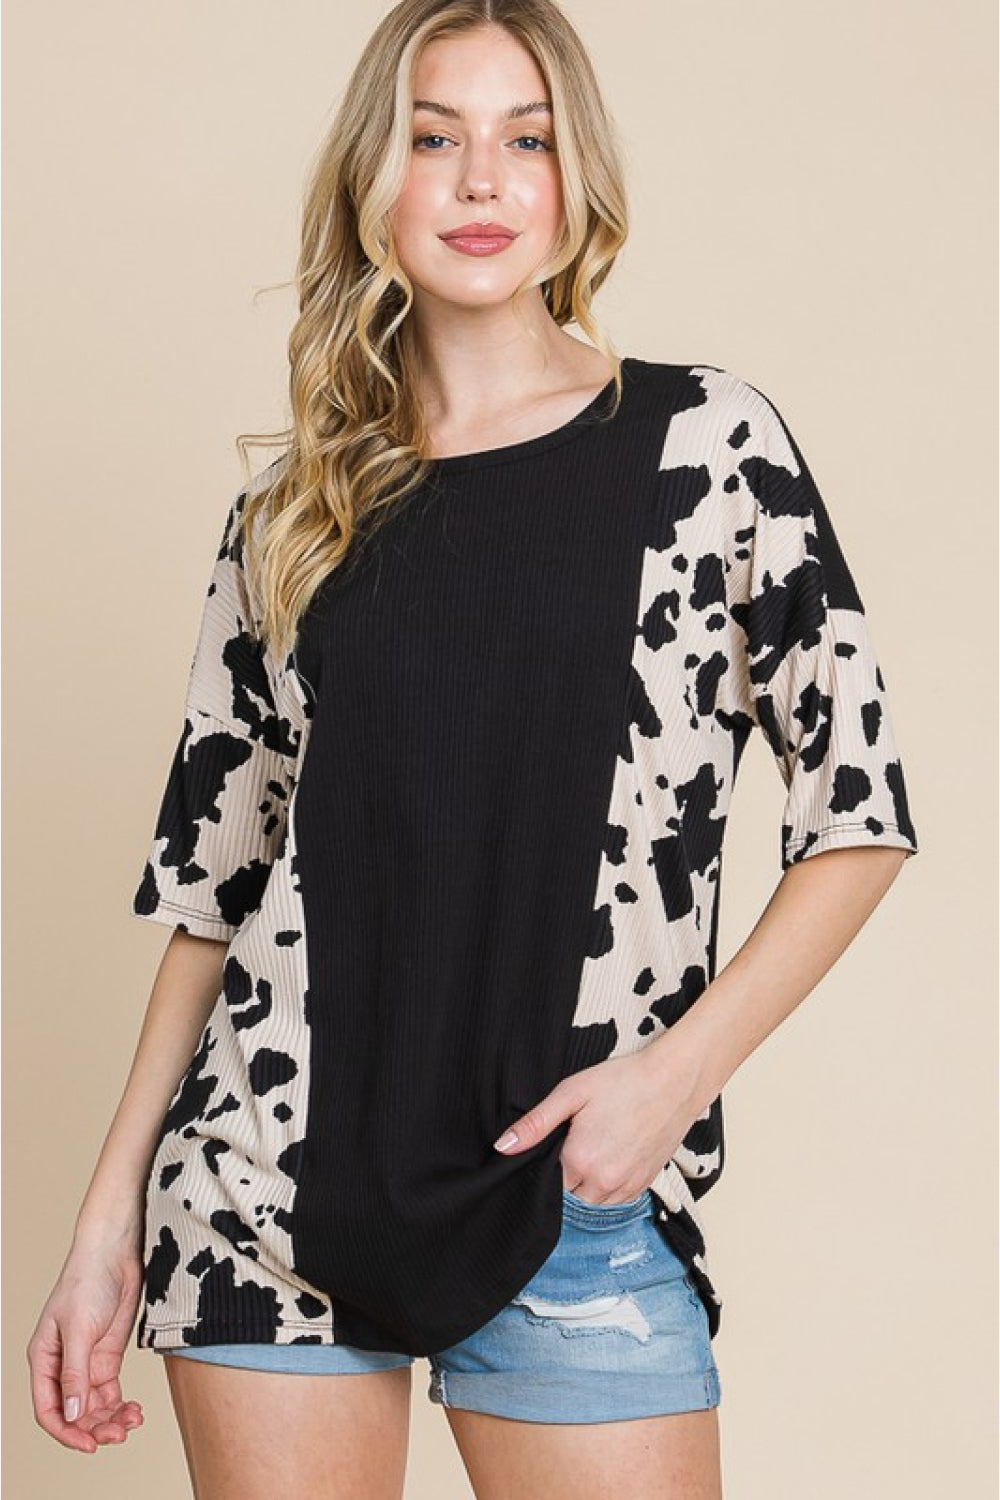 BOMBOM Solid Black Cow Pattern Contrast Half Sleeve Ribbed Knit Top